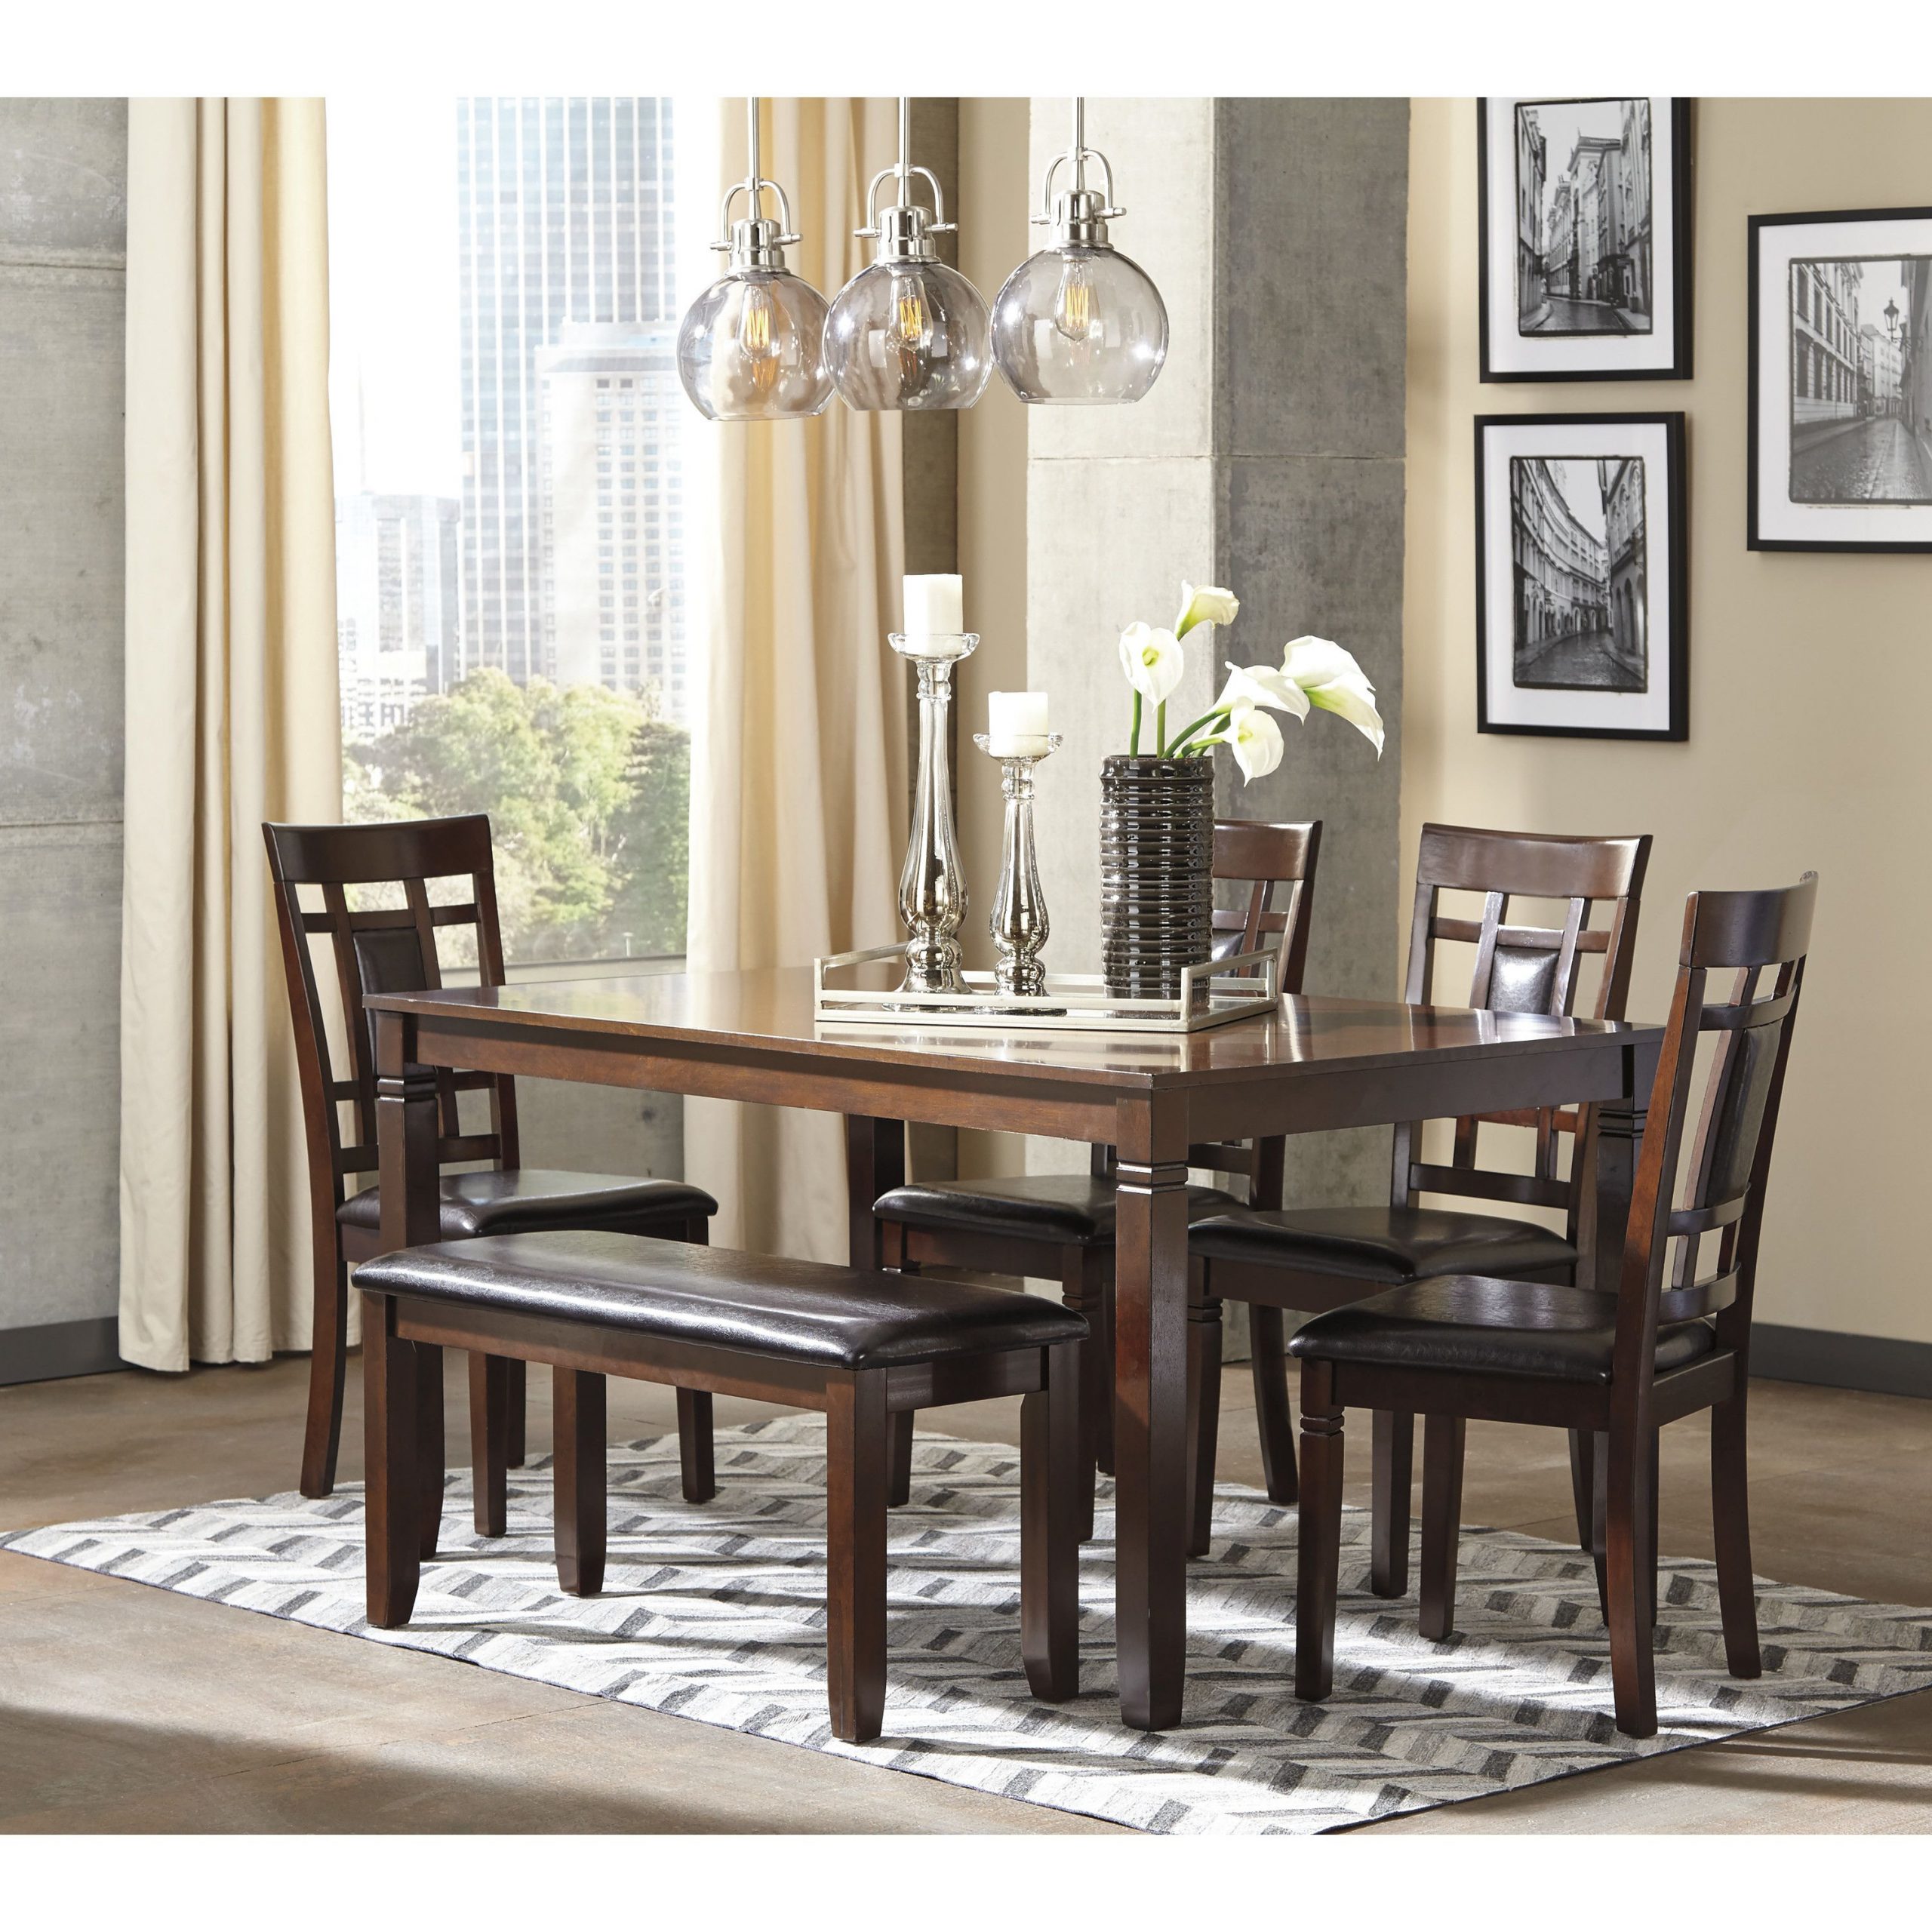 Unique Jcpenney Furniture Kitchen Tables with Simple Decor